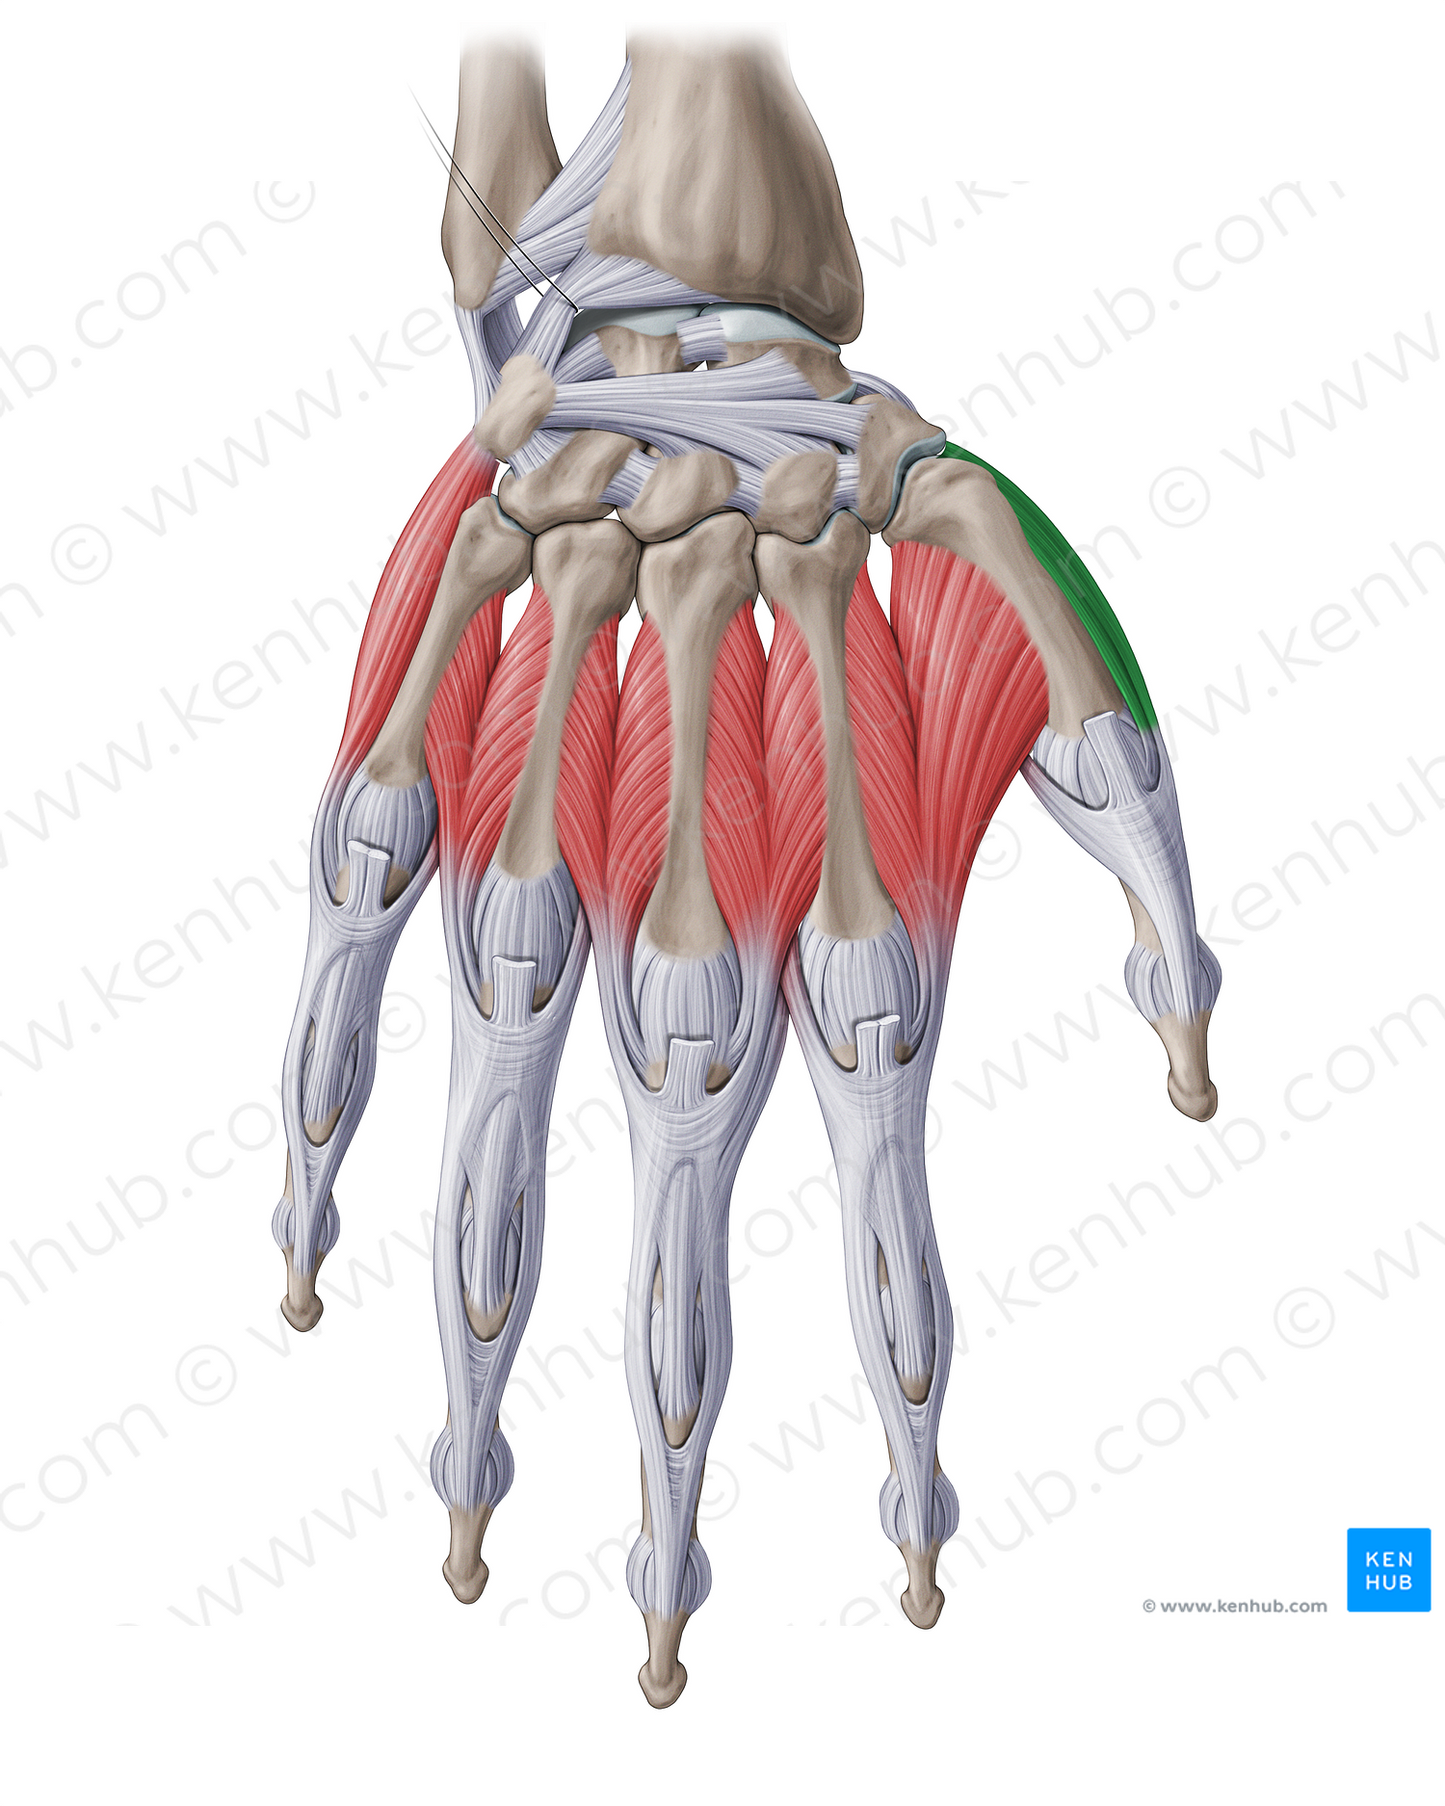 Abductor pollicis brevis muscle (#18781)